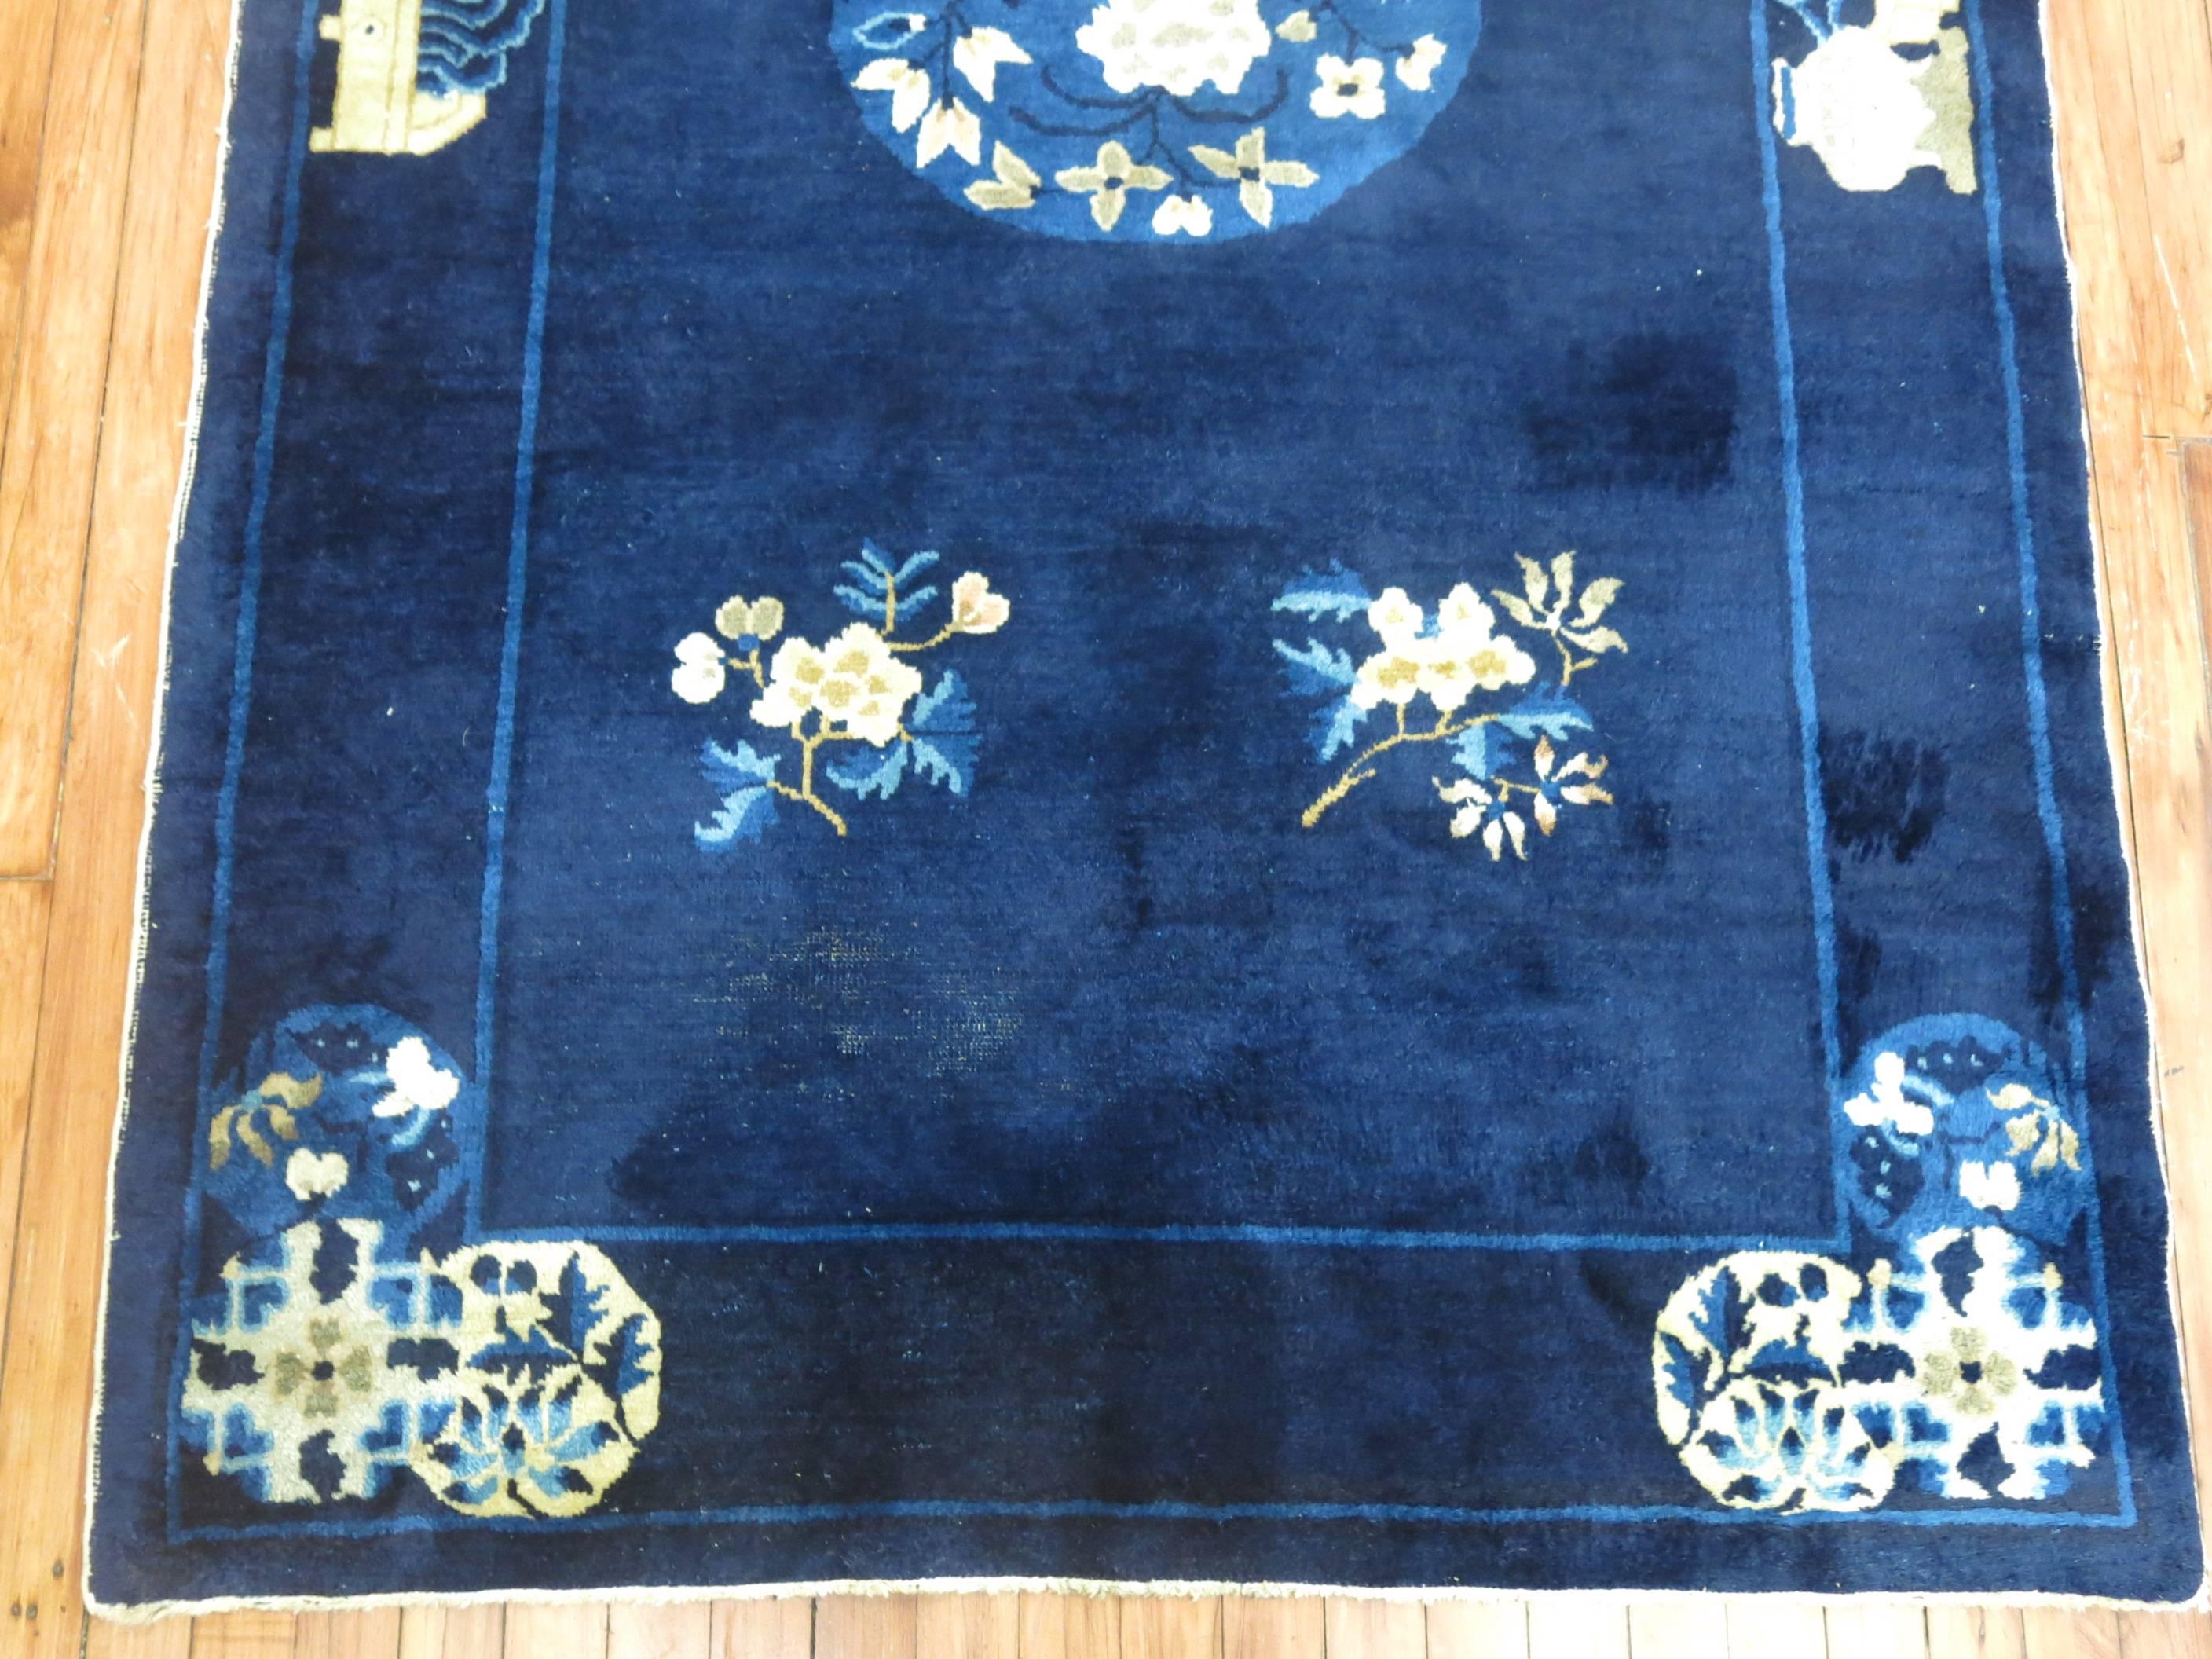 Stunning deep blue and ivory accent full pile condition antique Chinese Peking rug, circa 1920.

Measures: 4' x 6'9